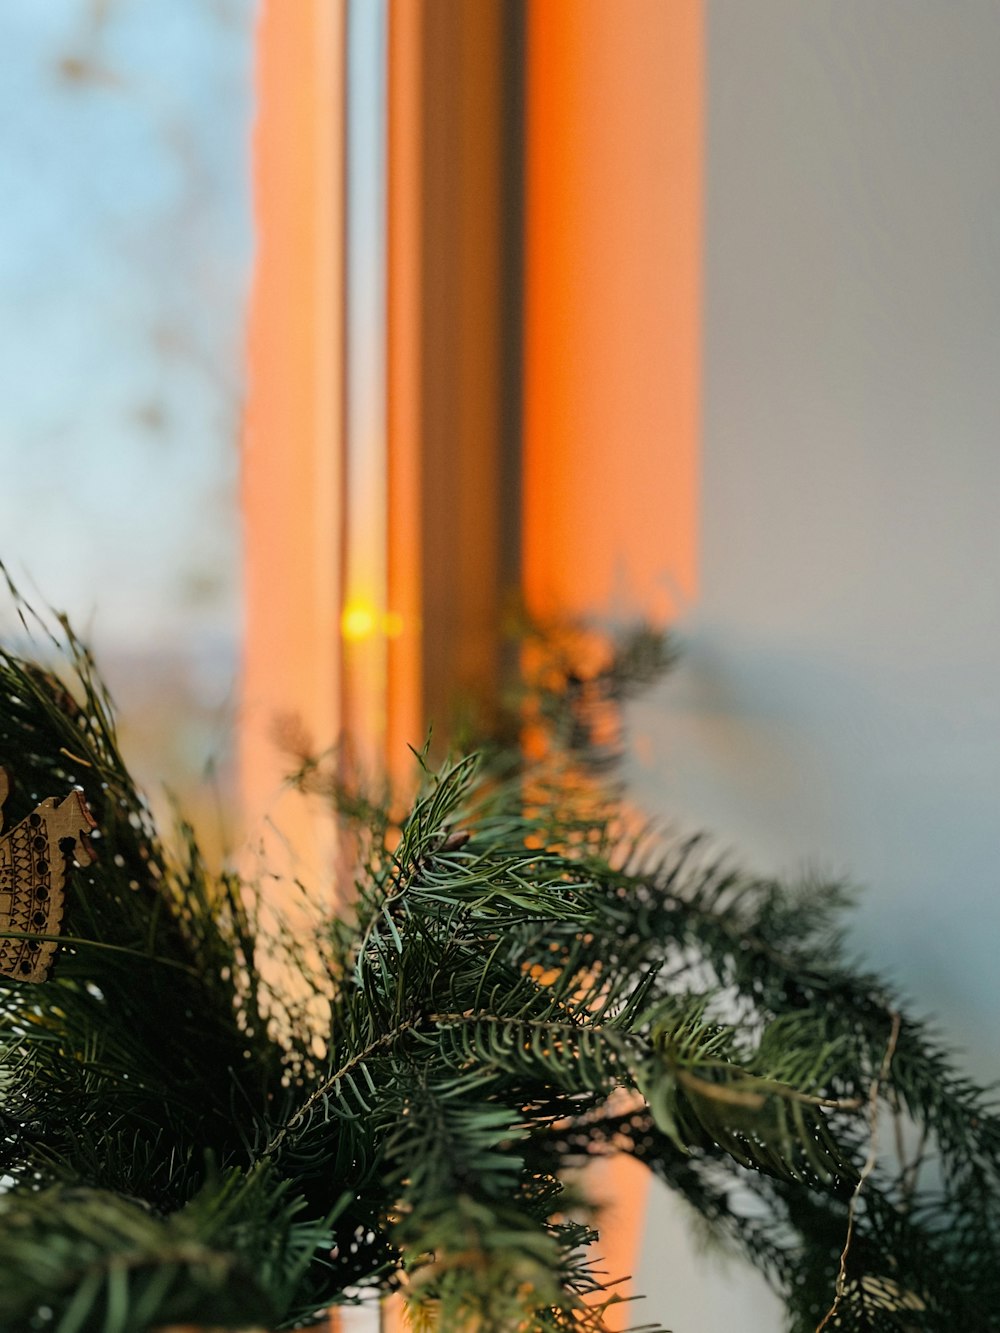 a close up of a pine branch with a window in the background